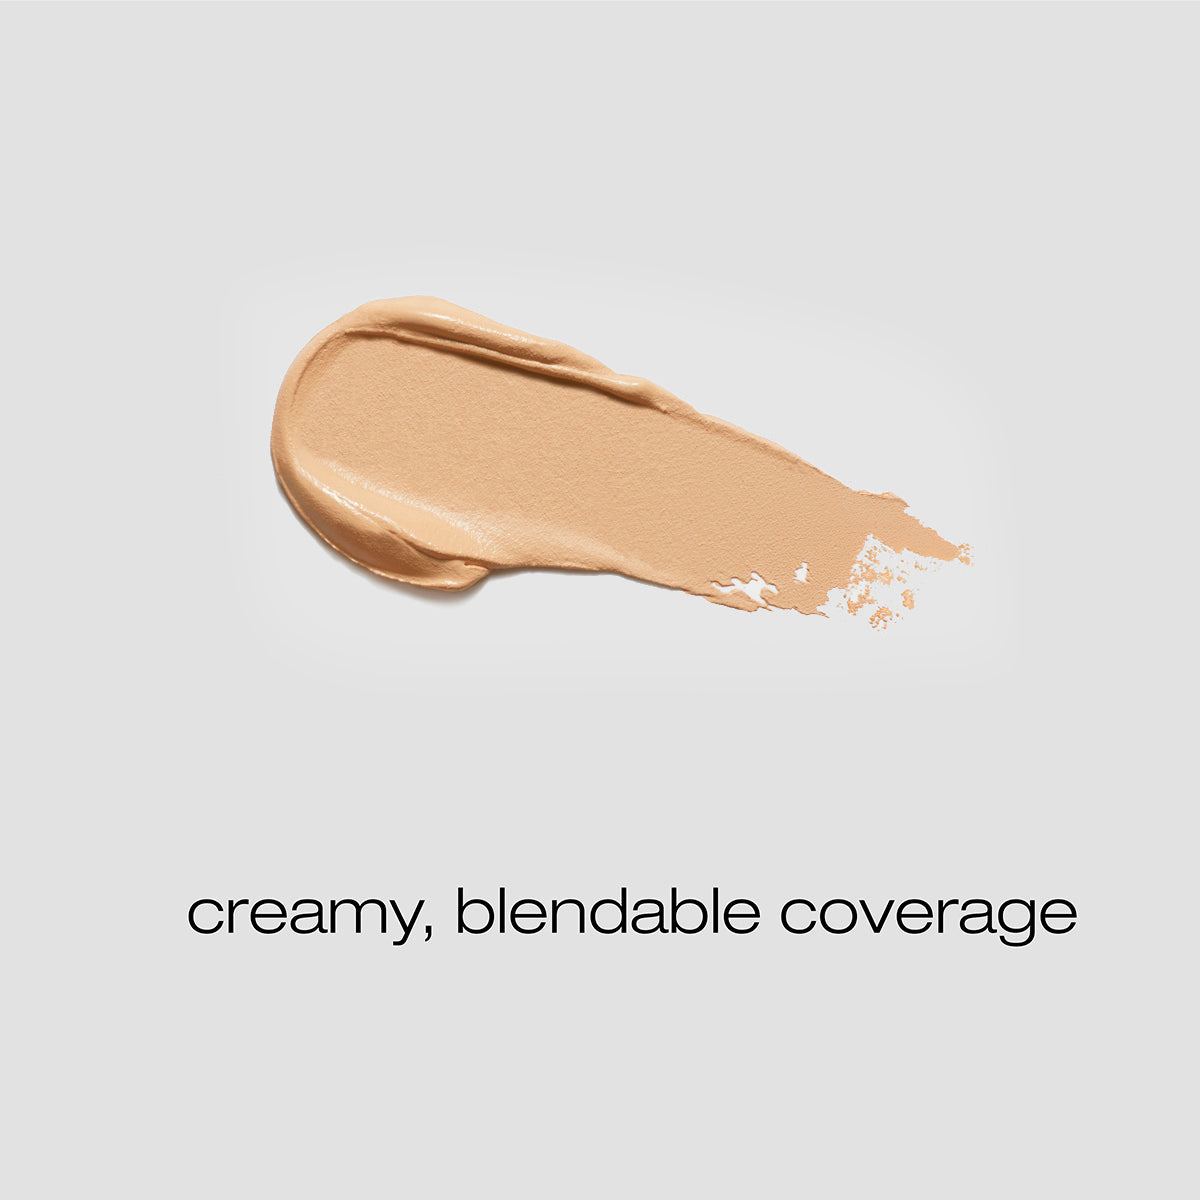 Spread of coconut concealer with description of creamy, blendable coverage